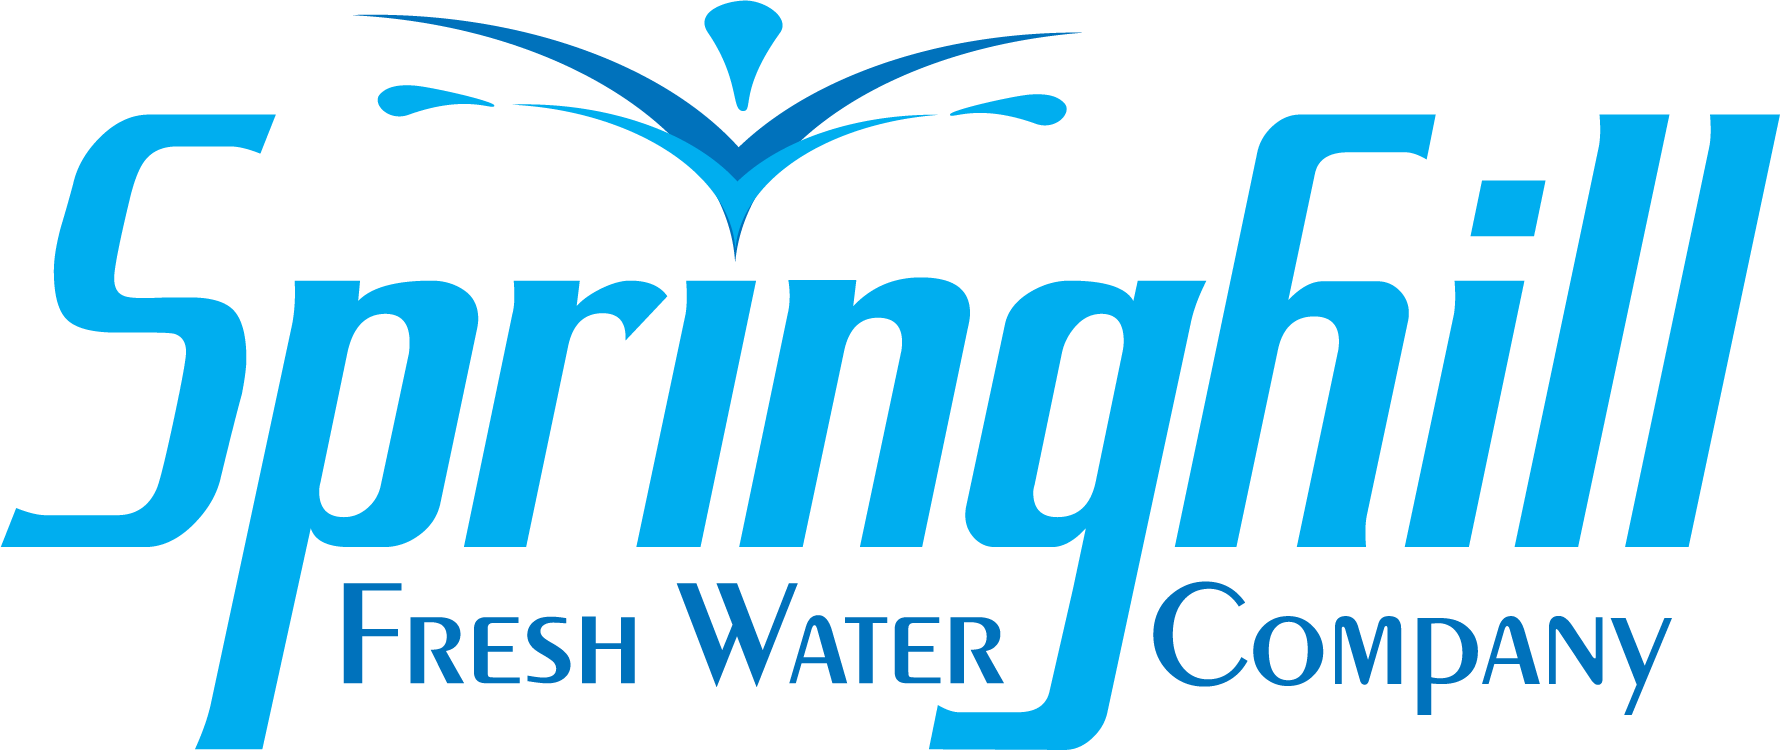 Springhill Fresh Water Company